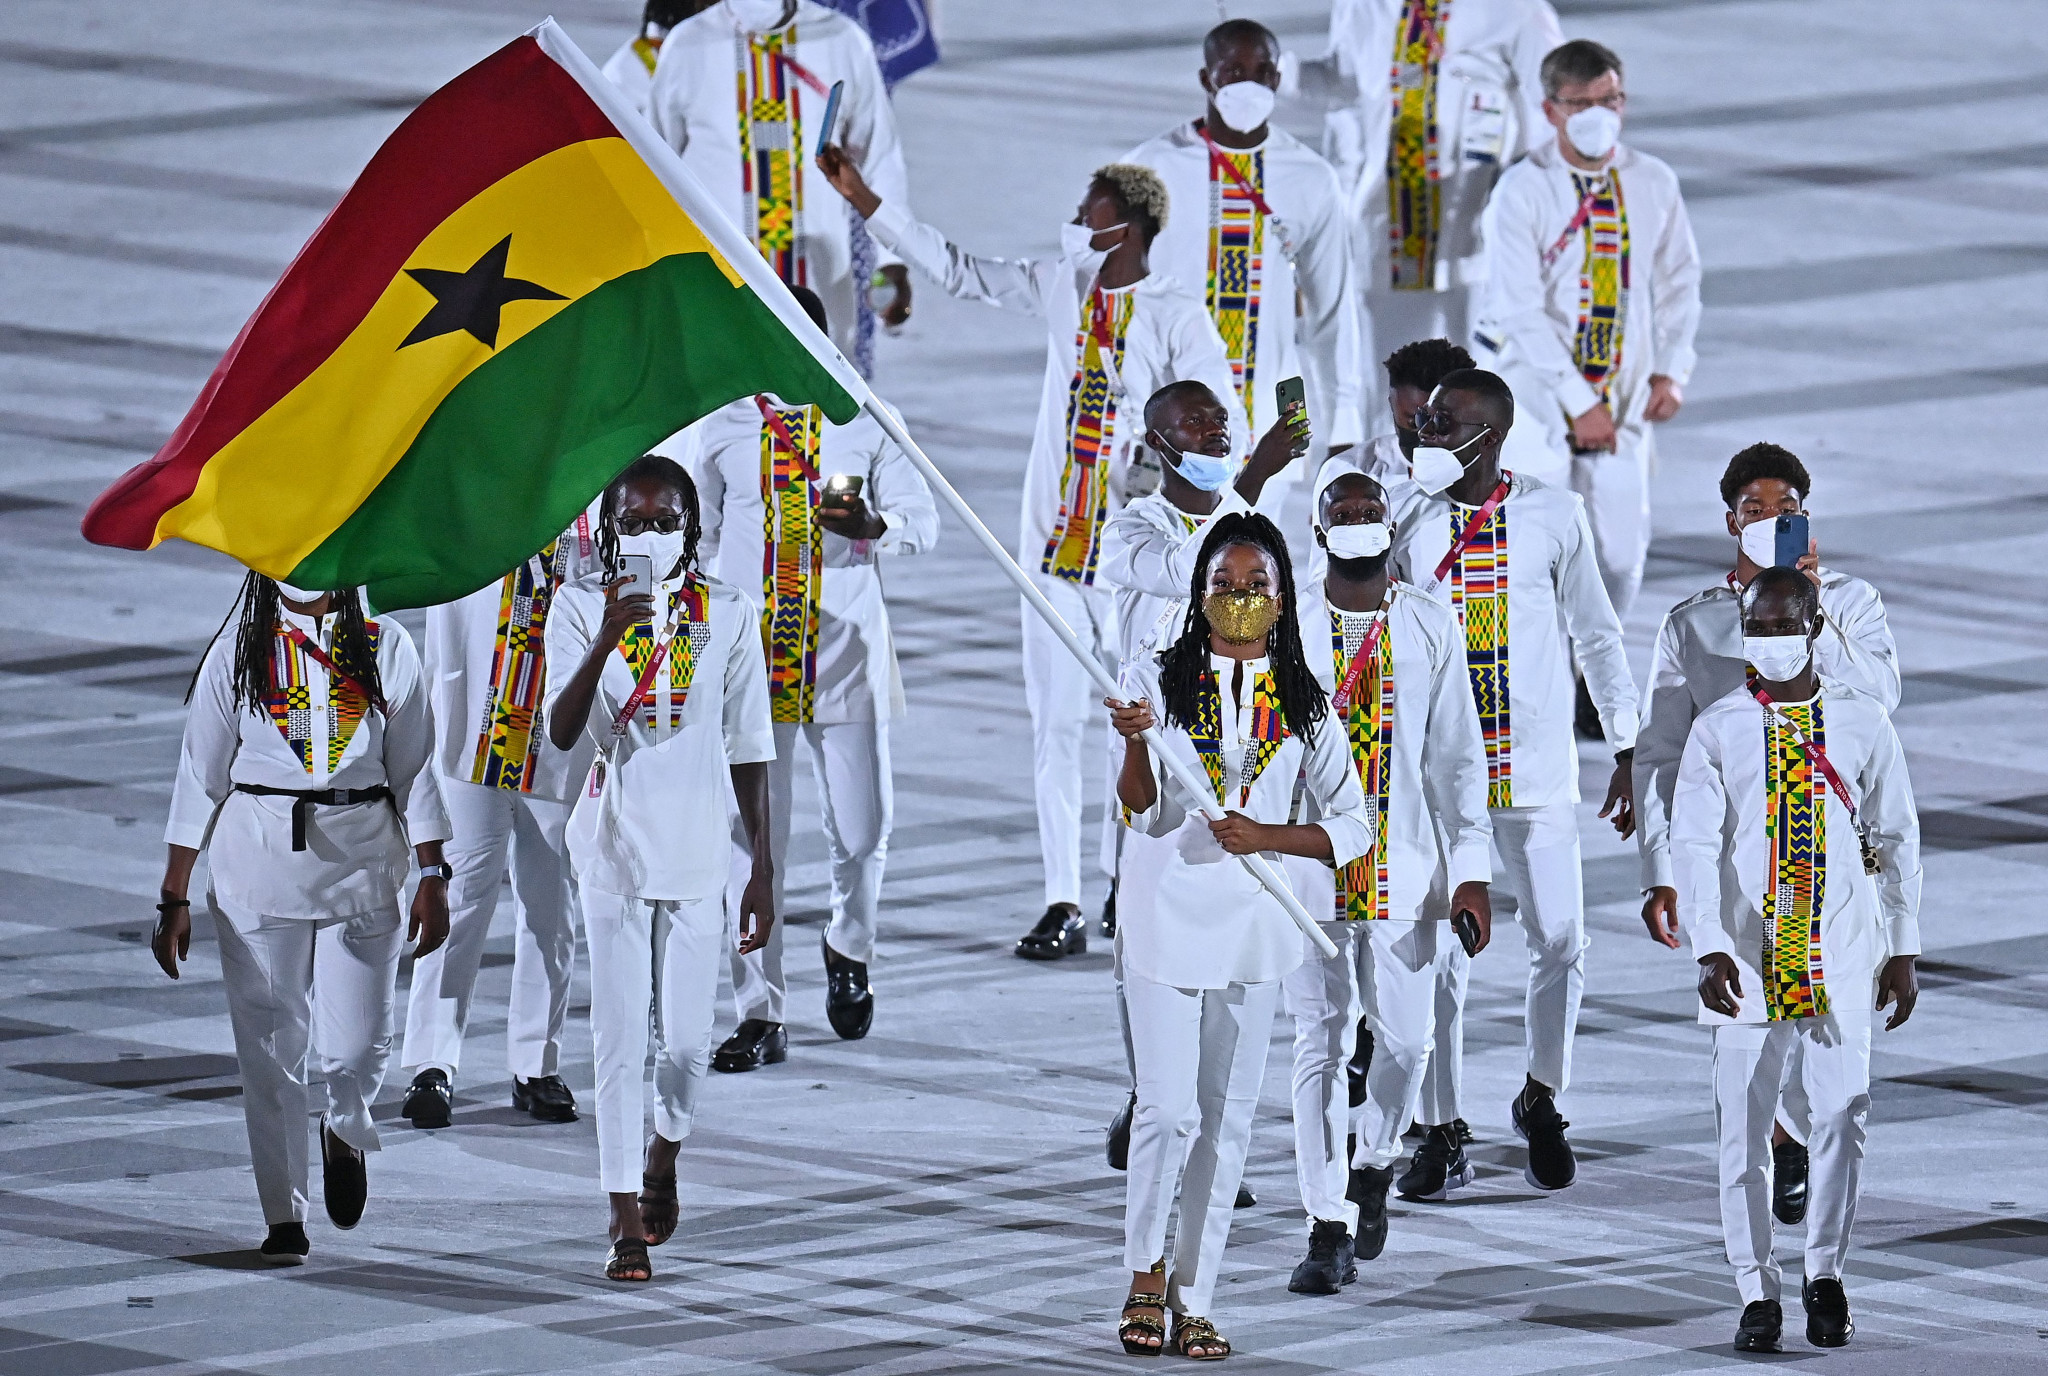 Samson Deen urged National Federations in Ghana to support athletes' preparations for the Accra 2023 African Games and African Para Games ©Getty Images